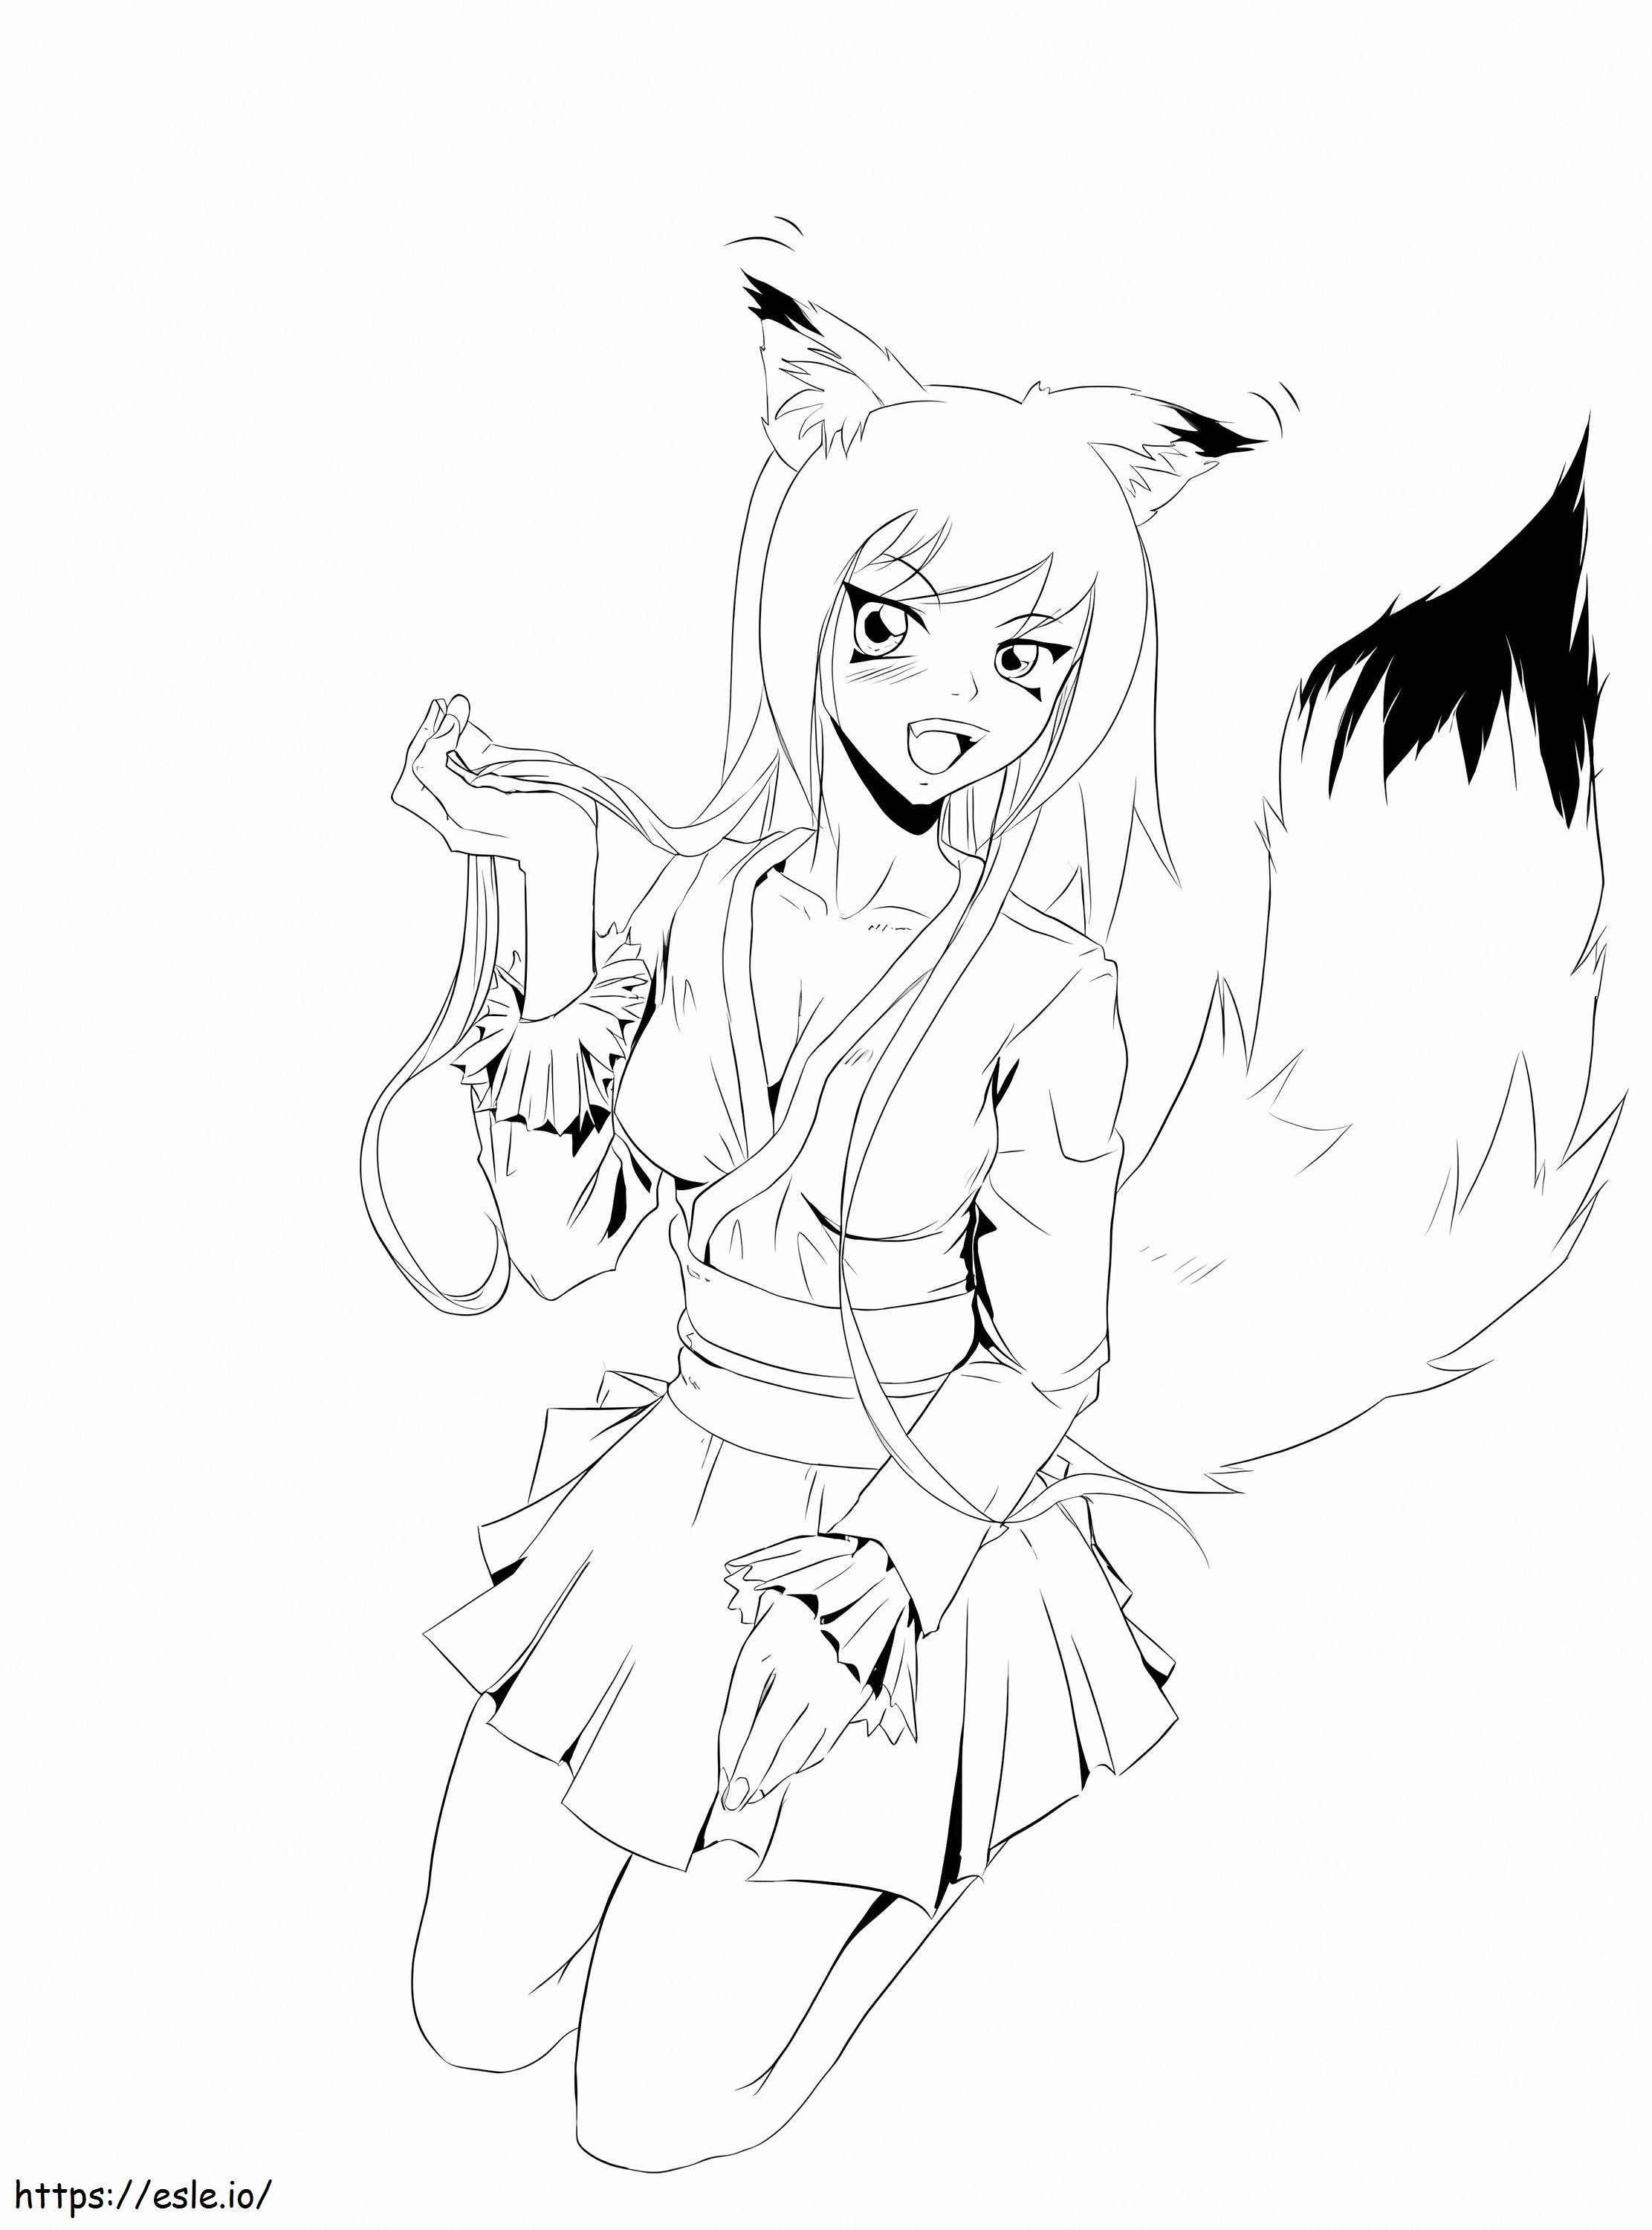 Funny Wolf Girl coloring page